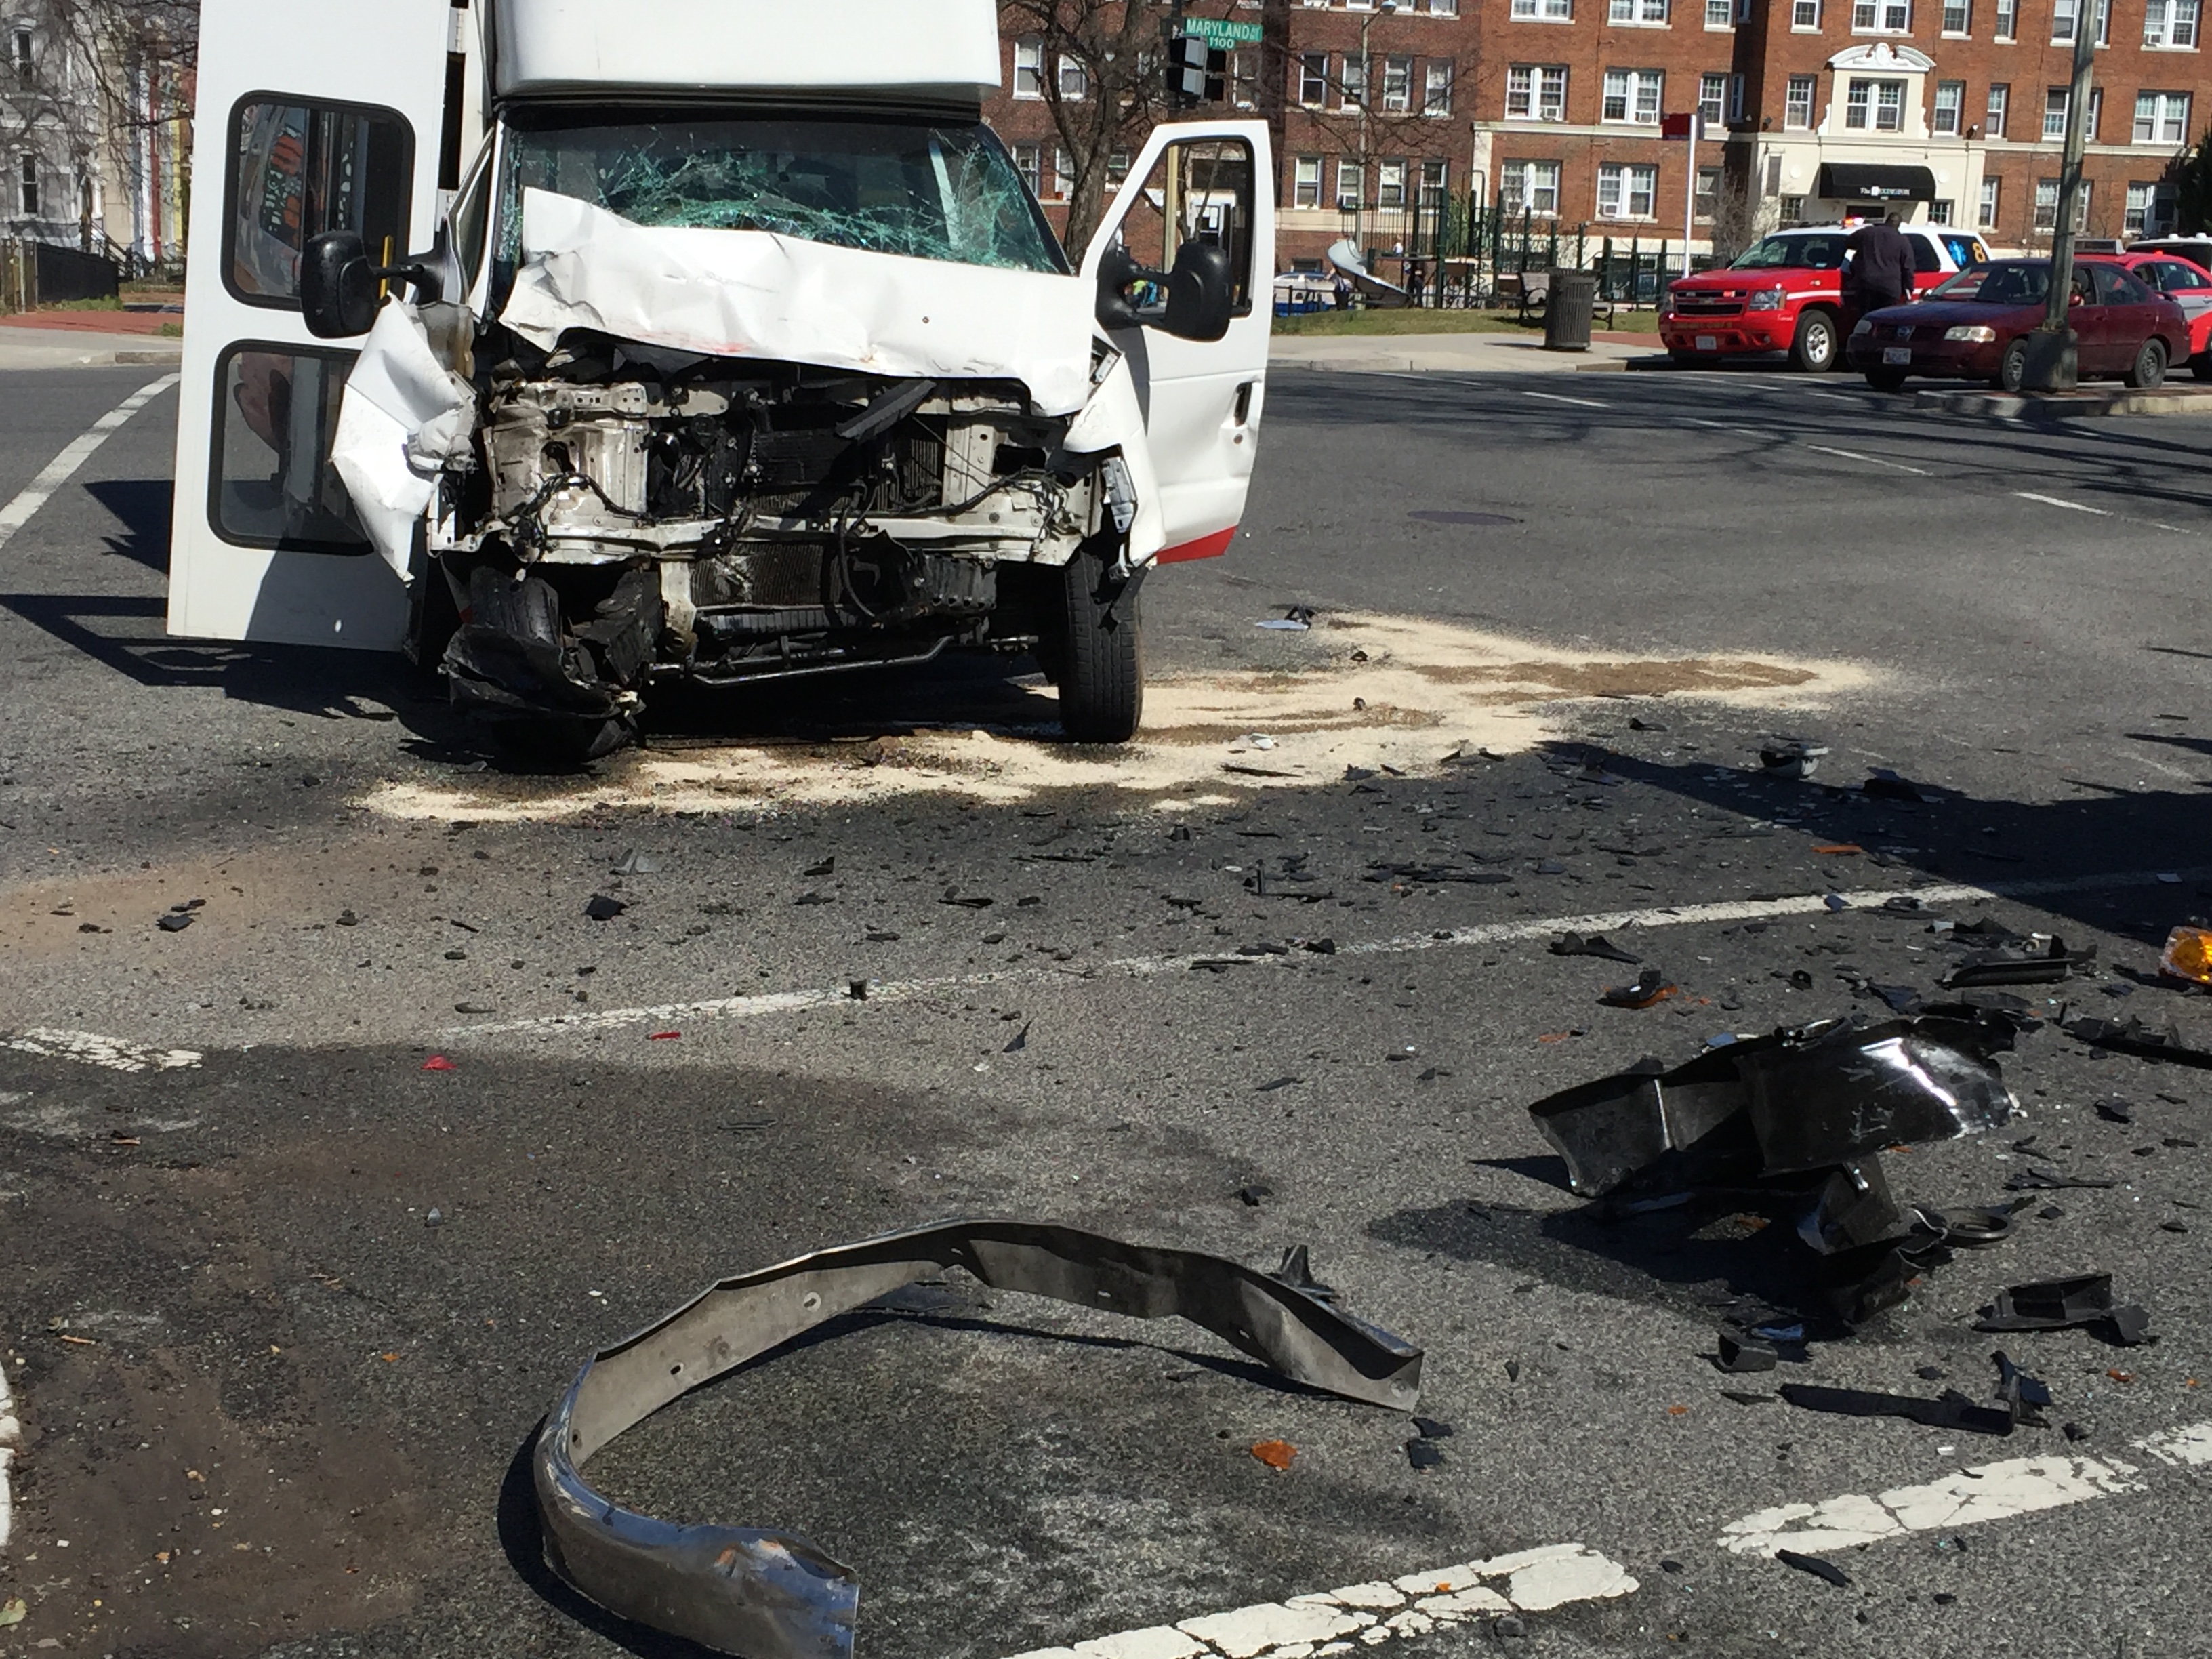 7 people, including D.C. firefighters, hurt after firetruck collides with van